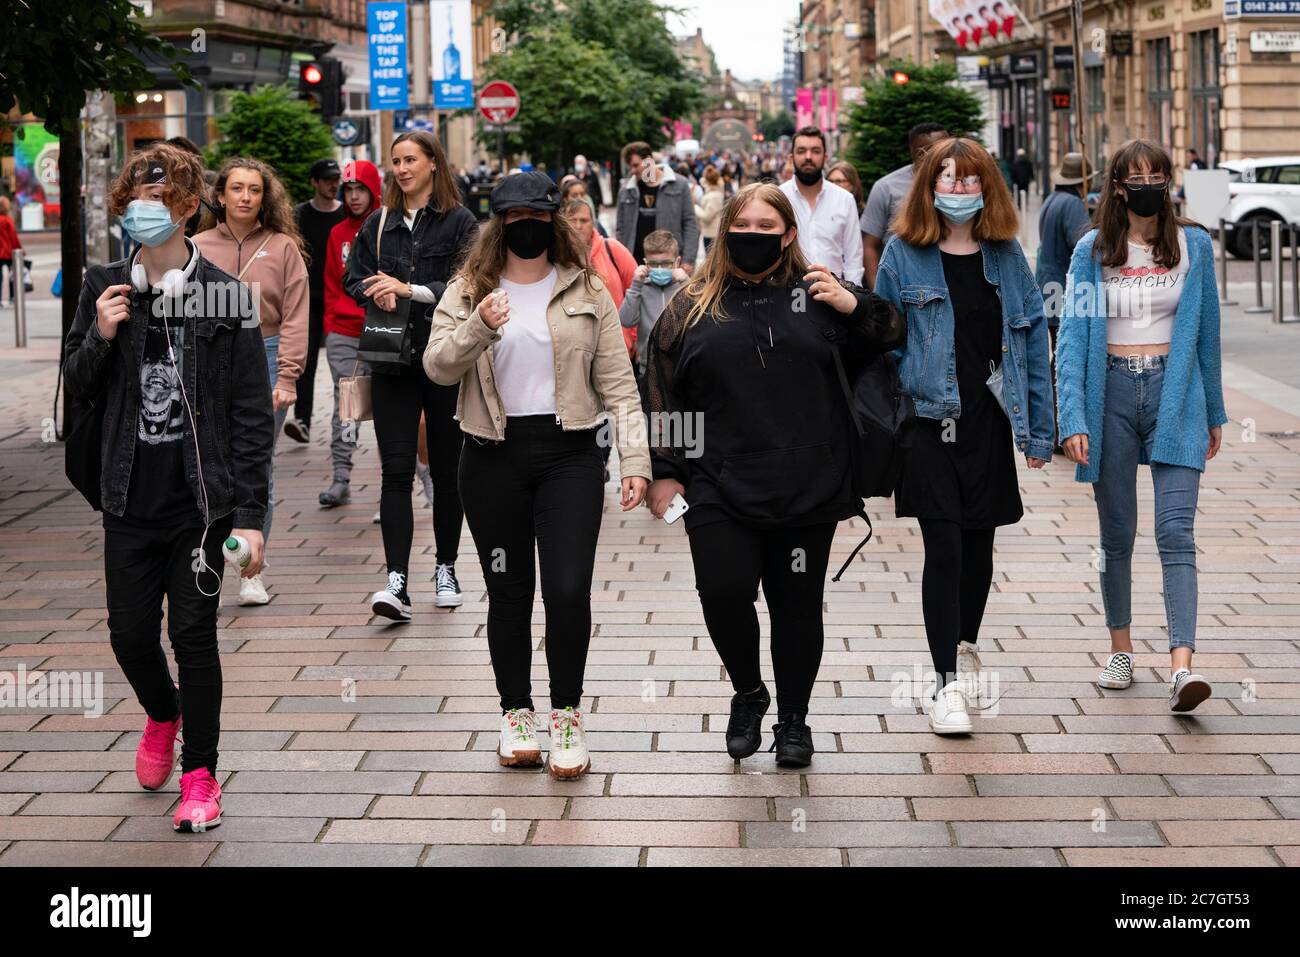 Glasgow, Scotland, UK. 17 July, 2020.  Images from Glasgow city centre as covid-19 restrictions are relaxed and  the public are out and about shopping and at work. Pictured; Young women walking on Buchanan Street wearing face coverings. Iain Masterton/Alamy Live News Stock Photo